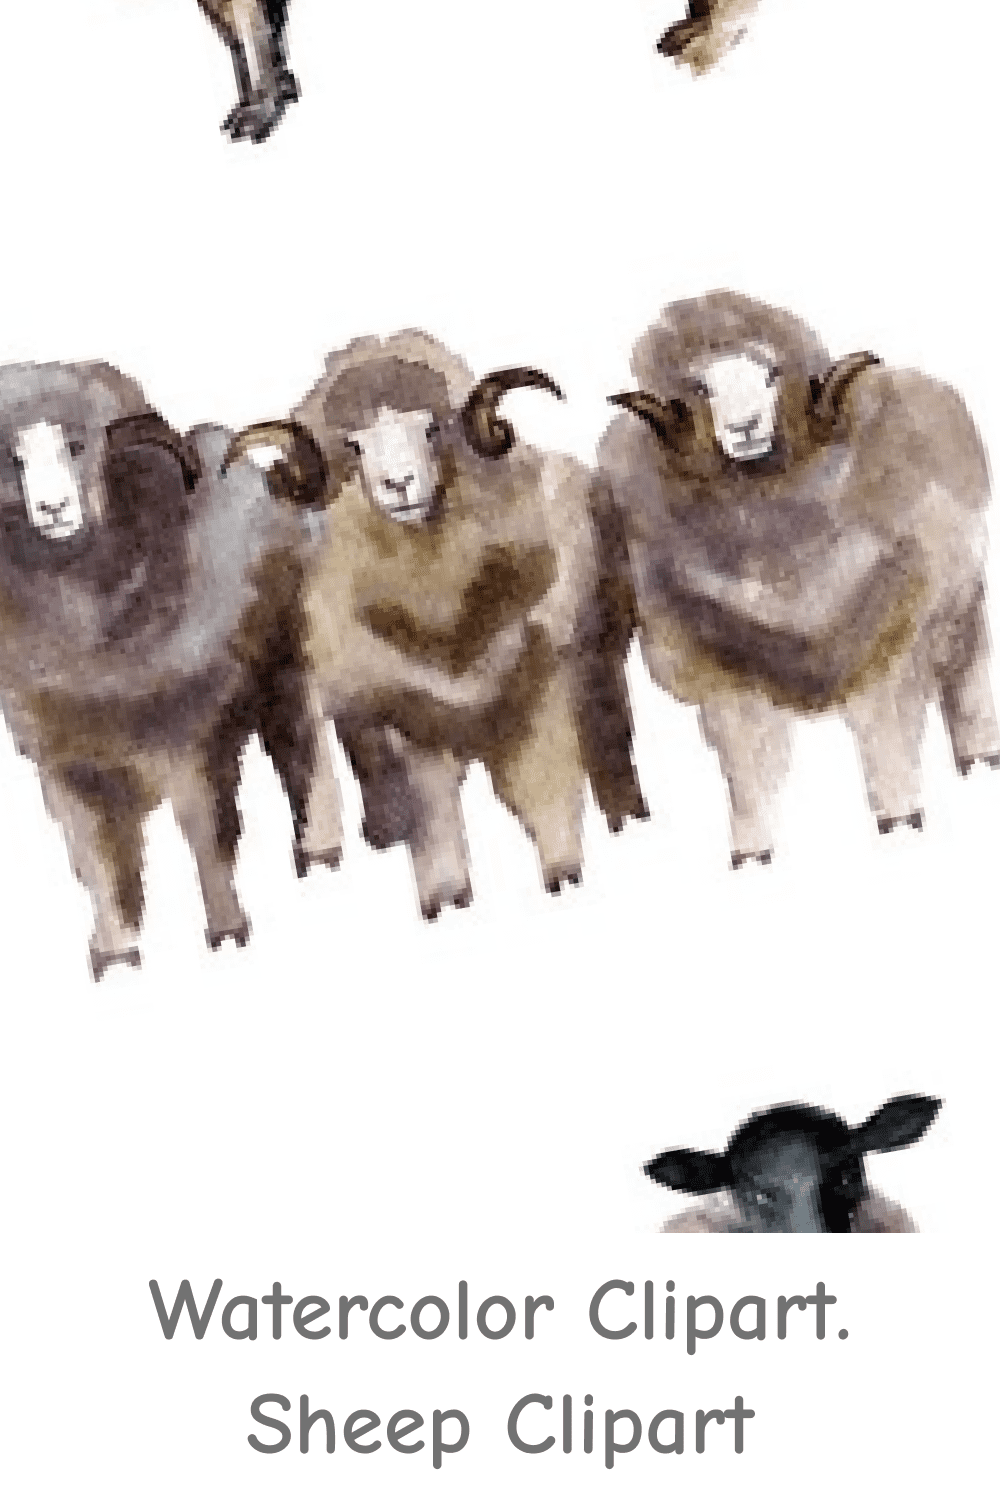 Watercolor Clipart. Sheep Clipart.